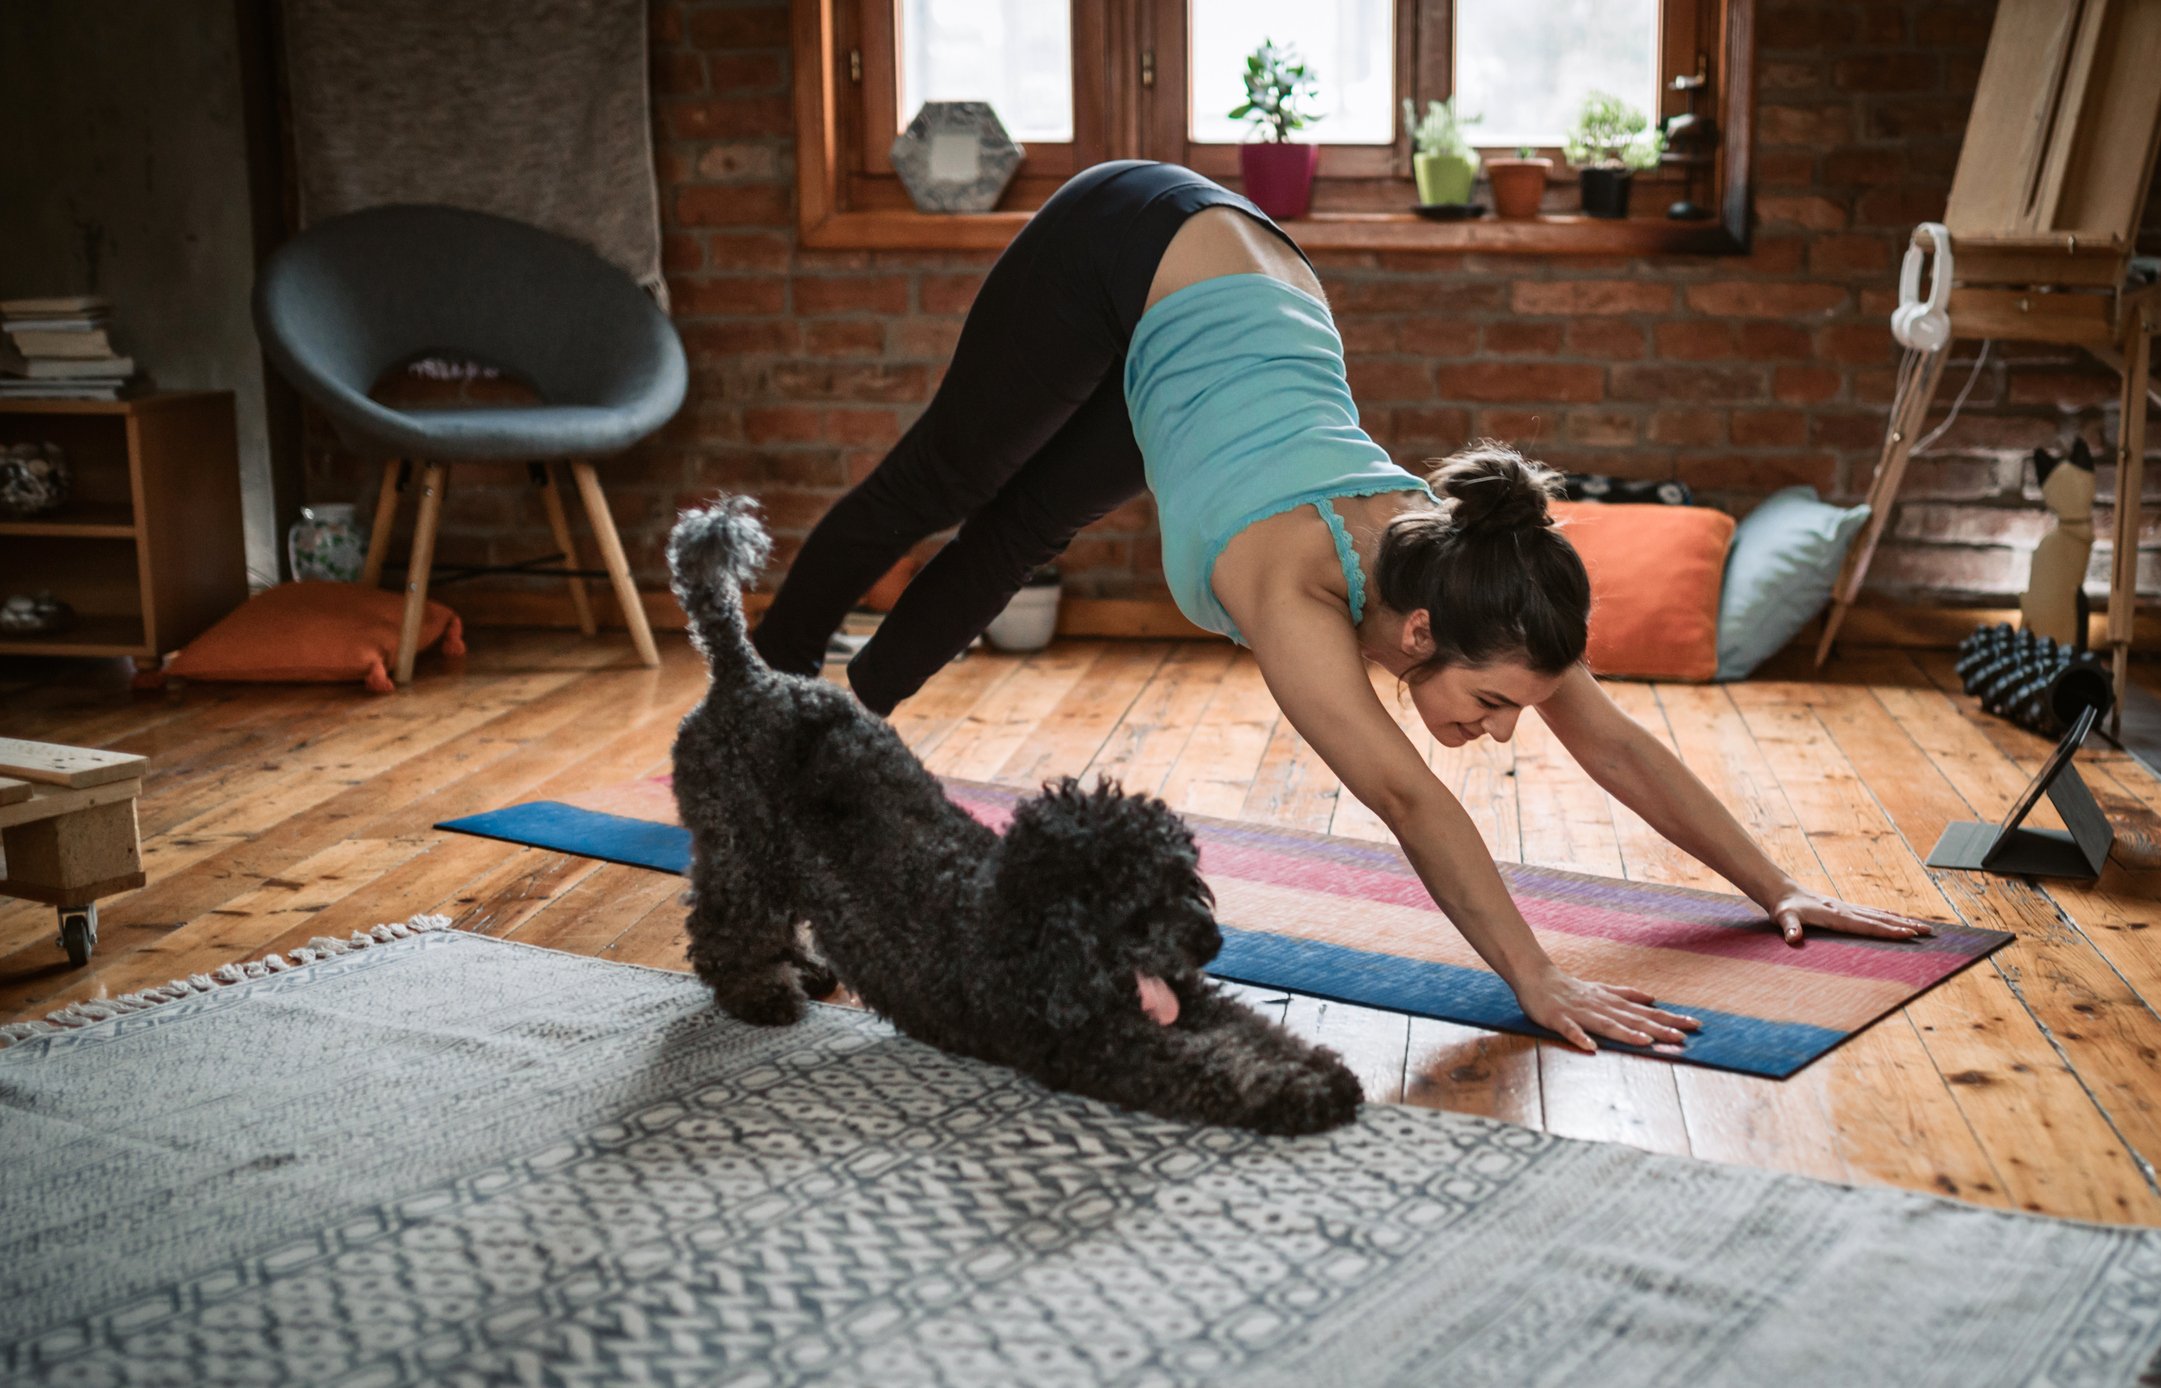 Young woman practices downward facing dog pose with her dog in their living room.